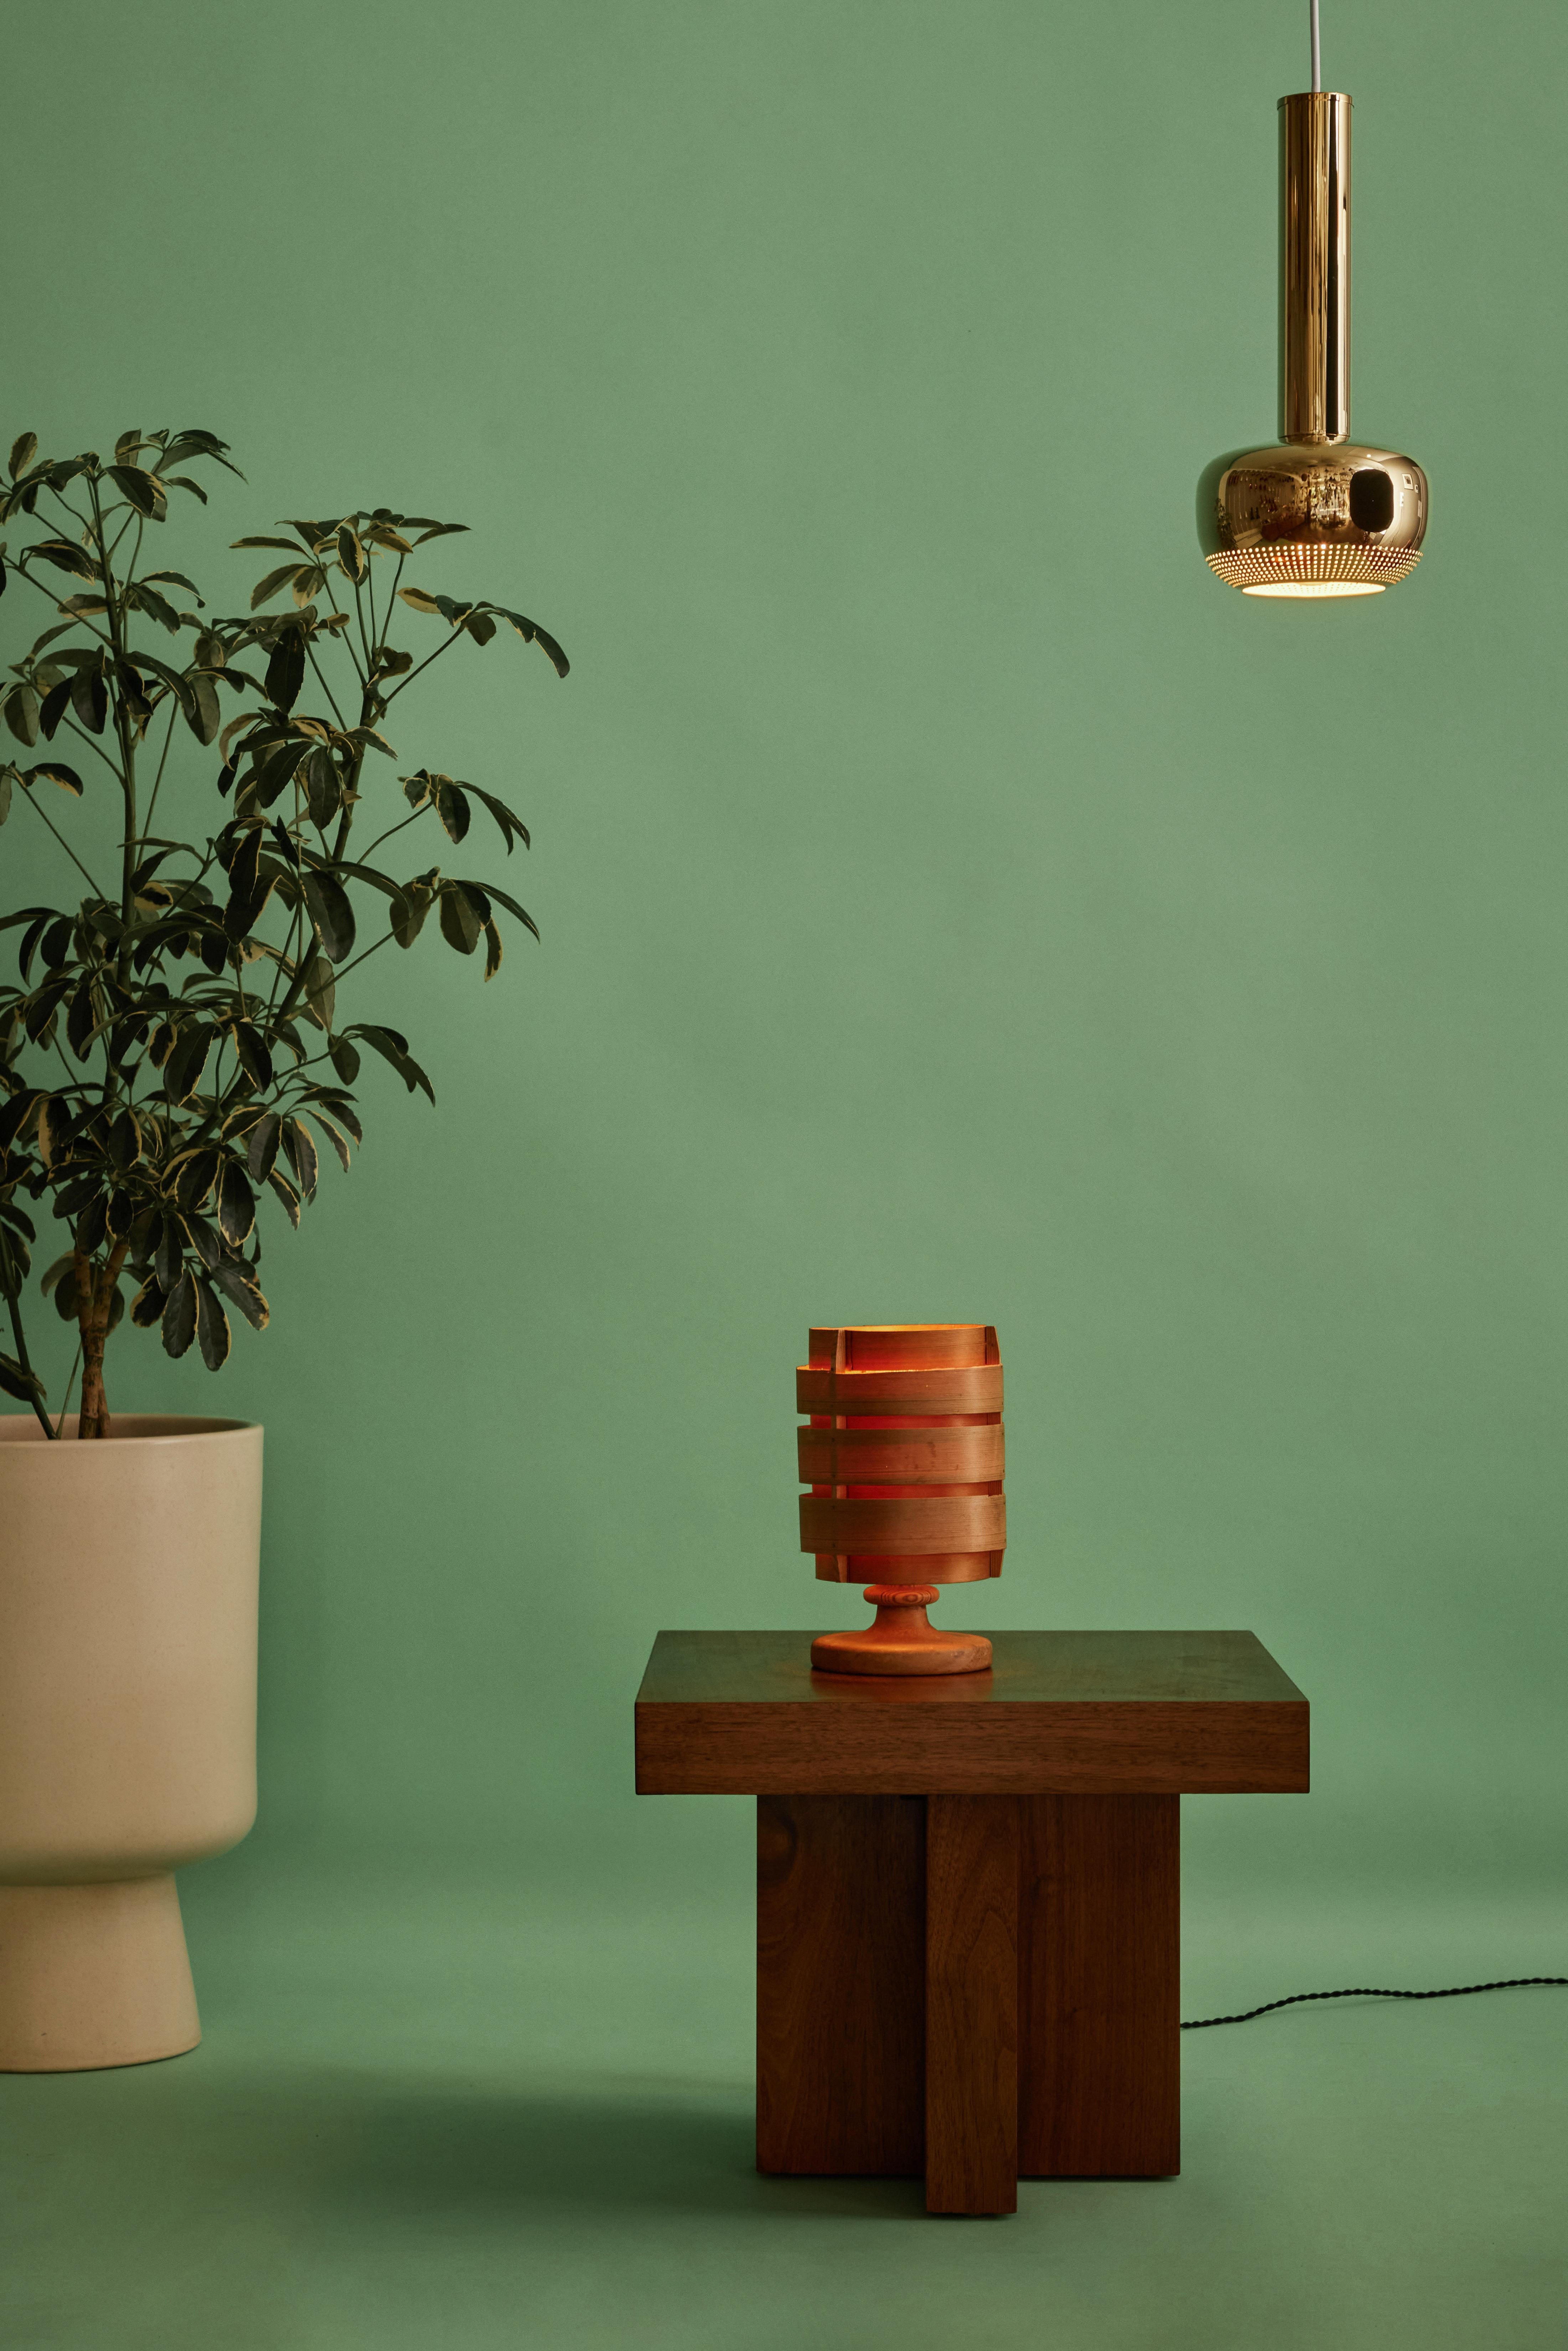 1960s Hans-Agne Jakobsson Model B148 Wood Table Lamp for AB Ellysett. Designed and produced by Jakobsson in Markaryd, Sweden and executed in thin bentwood with solid wooden base structure. A rare and sculptural lamp that has become increasingly